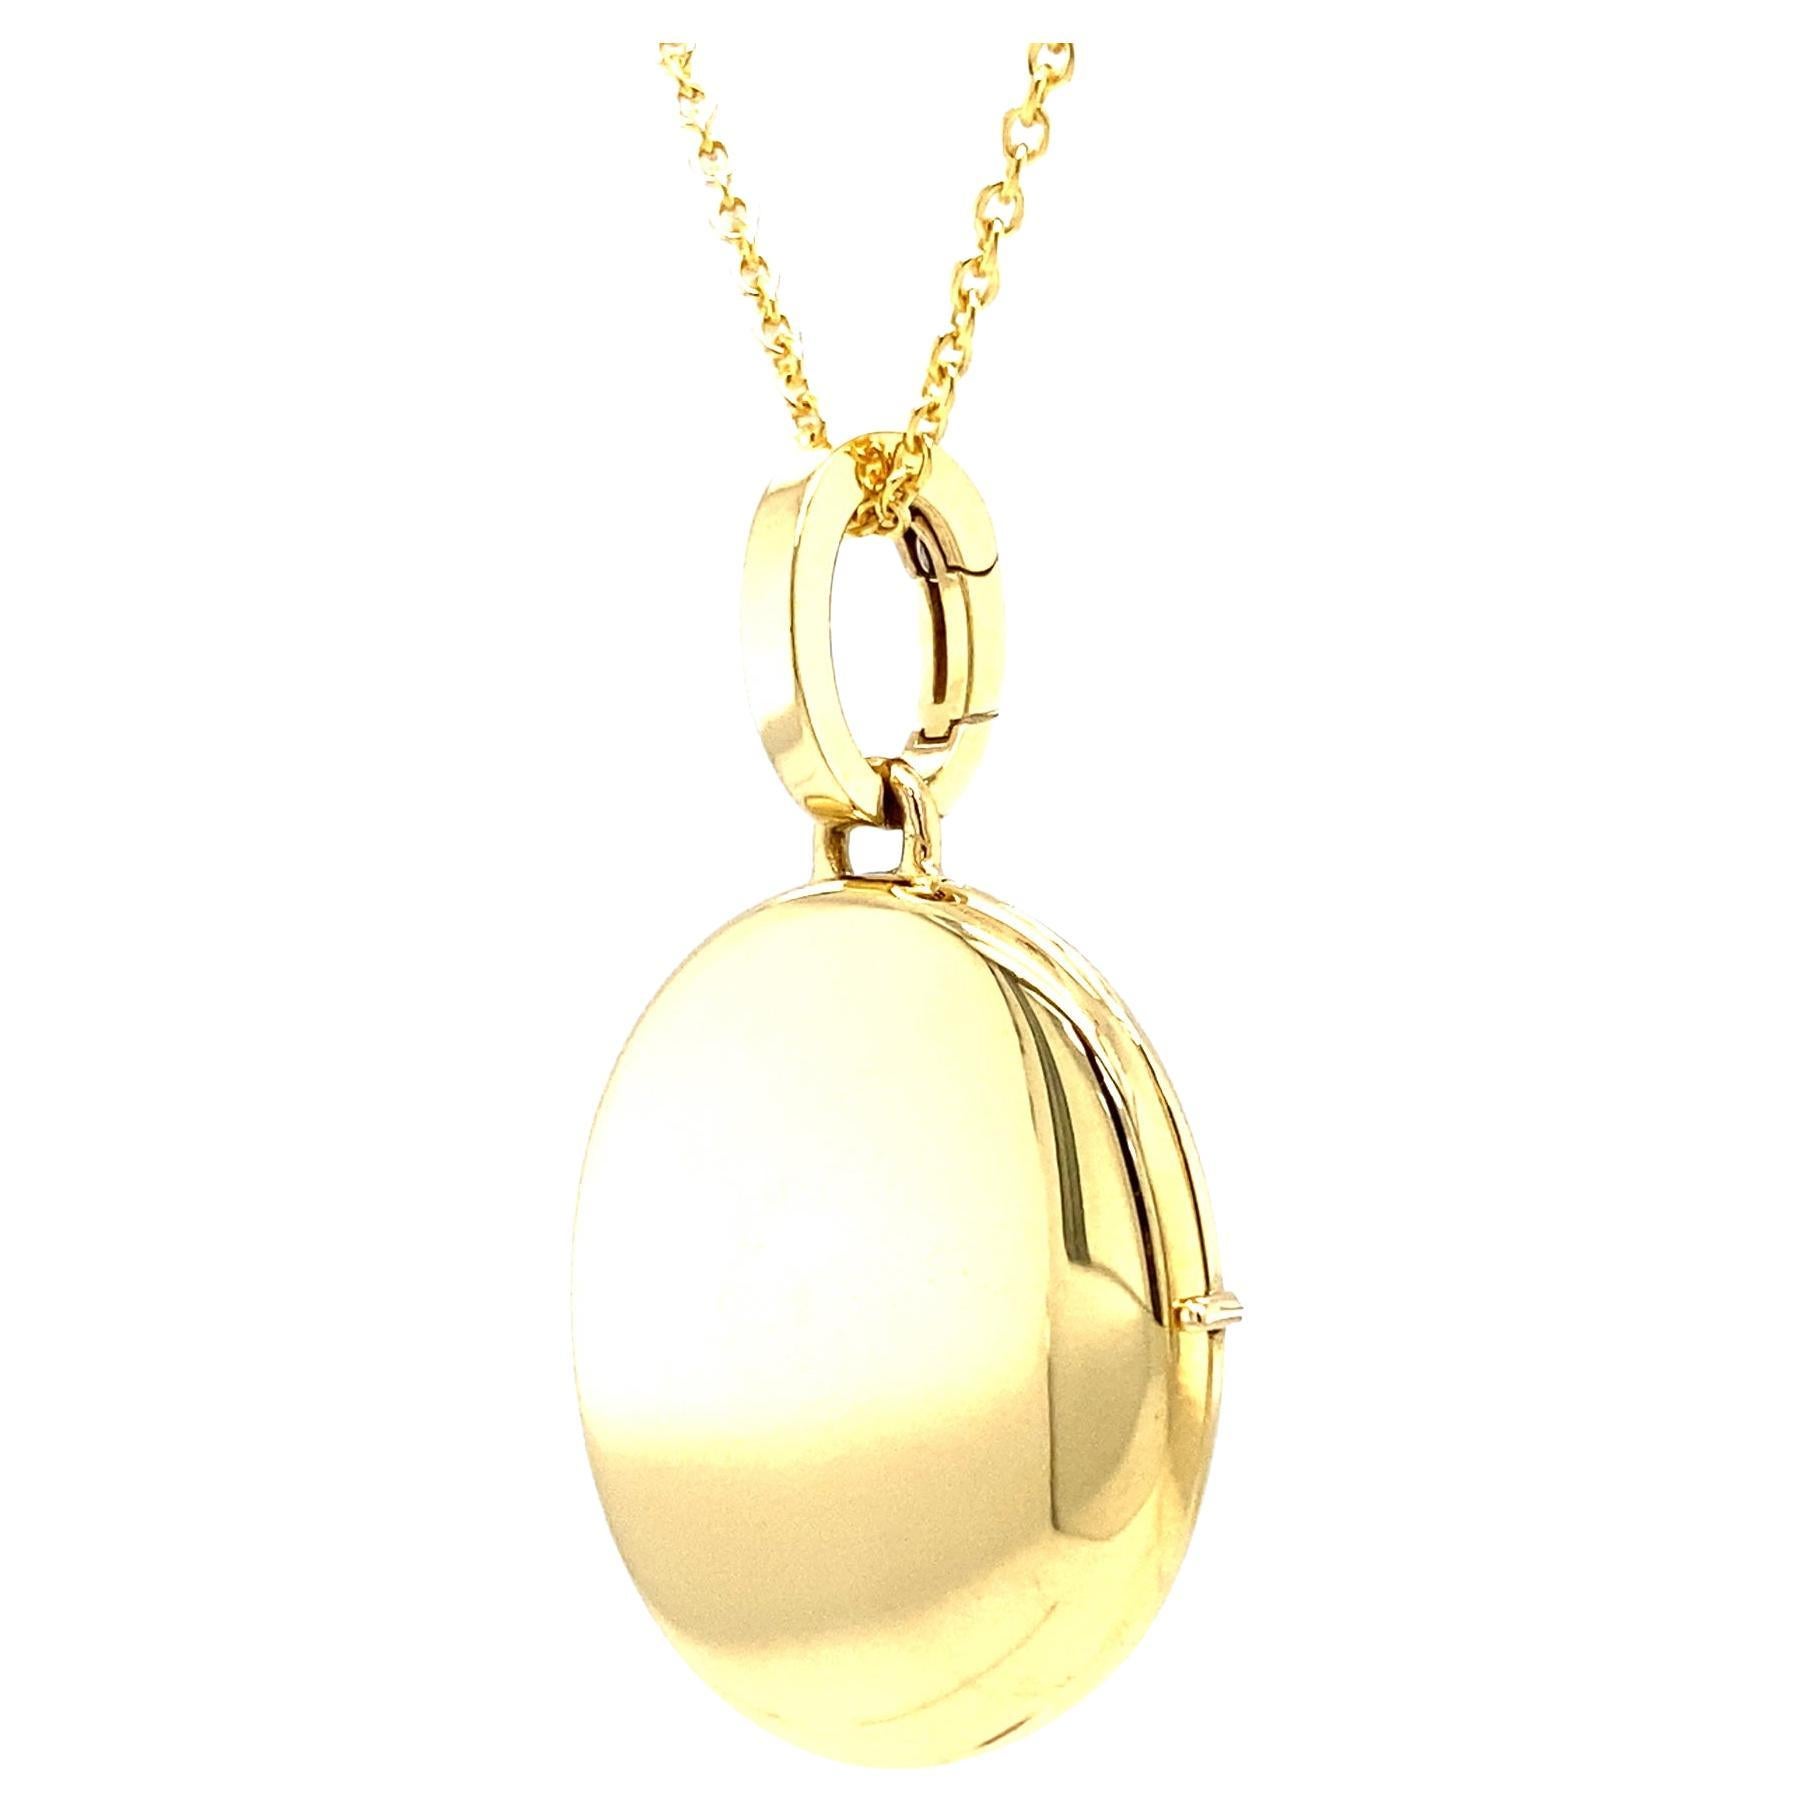 Customizable Oval Polished Pendant Locket Necklace 18k Yellow Gold 23 mm x 20 mm